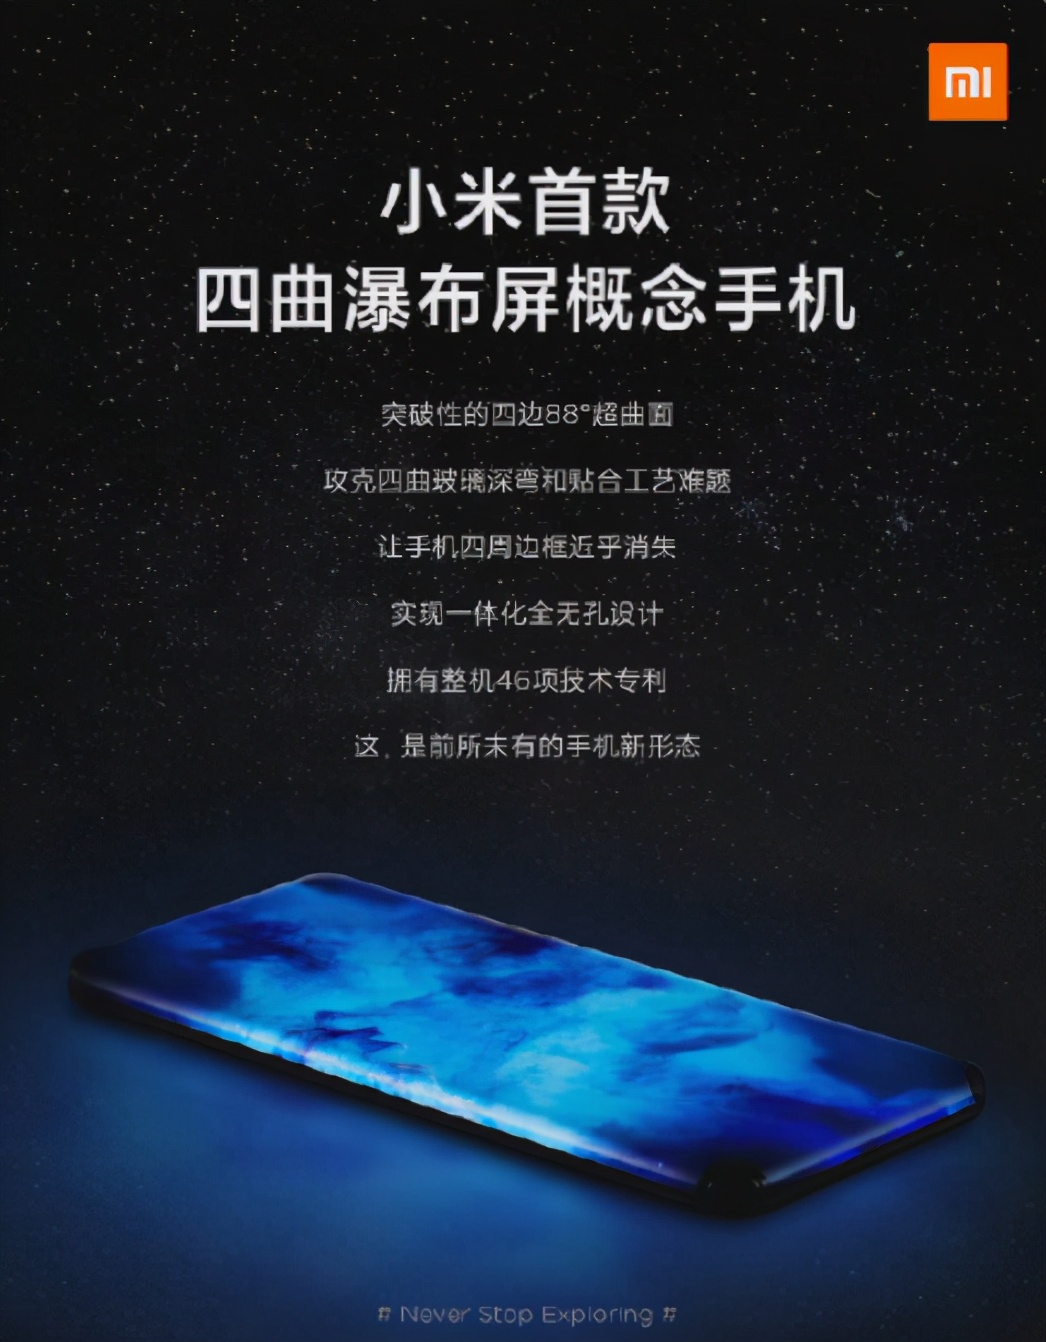 Millet beautiful muscle announces new design! Screen of chute of 4 curved surface, china for P40 already outdated